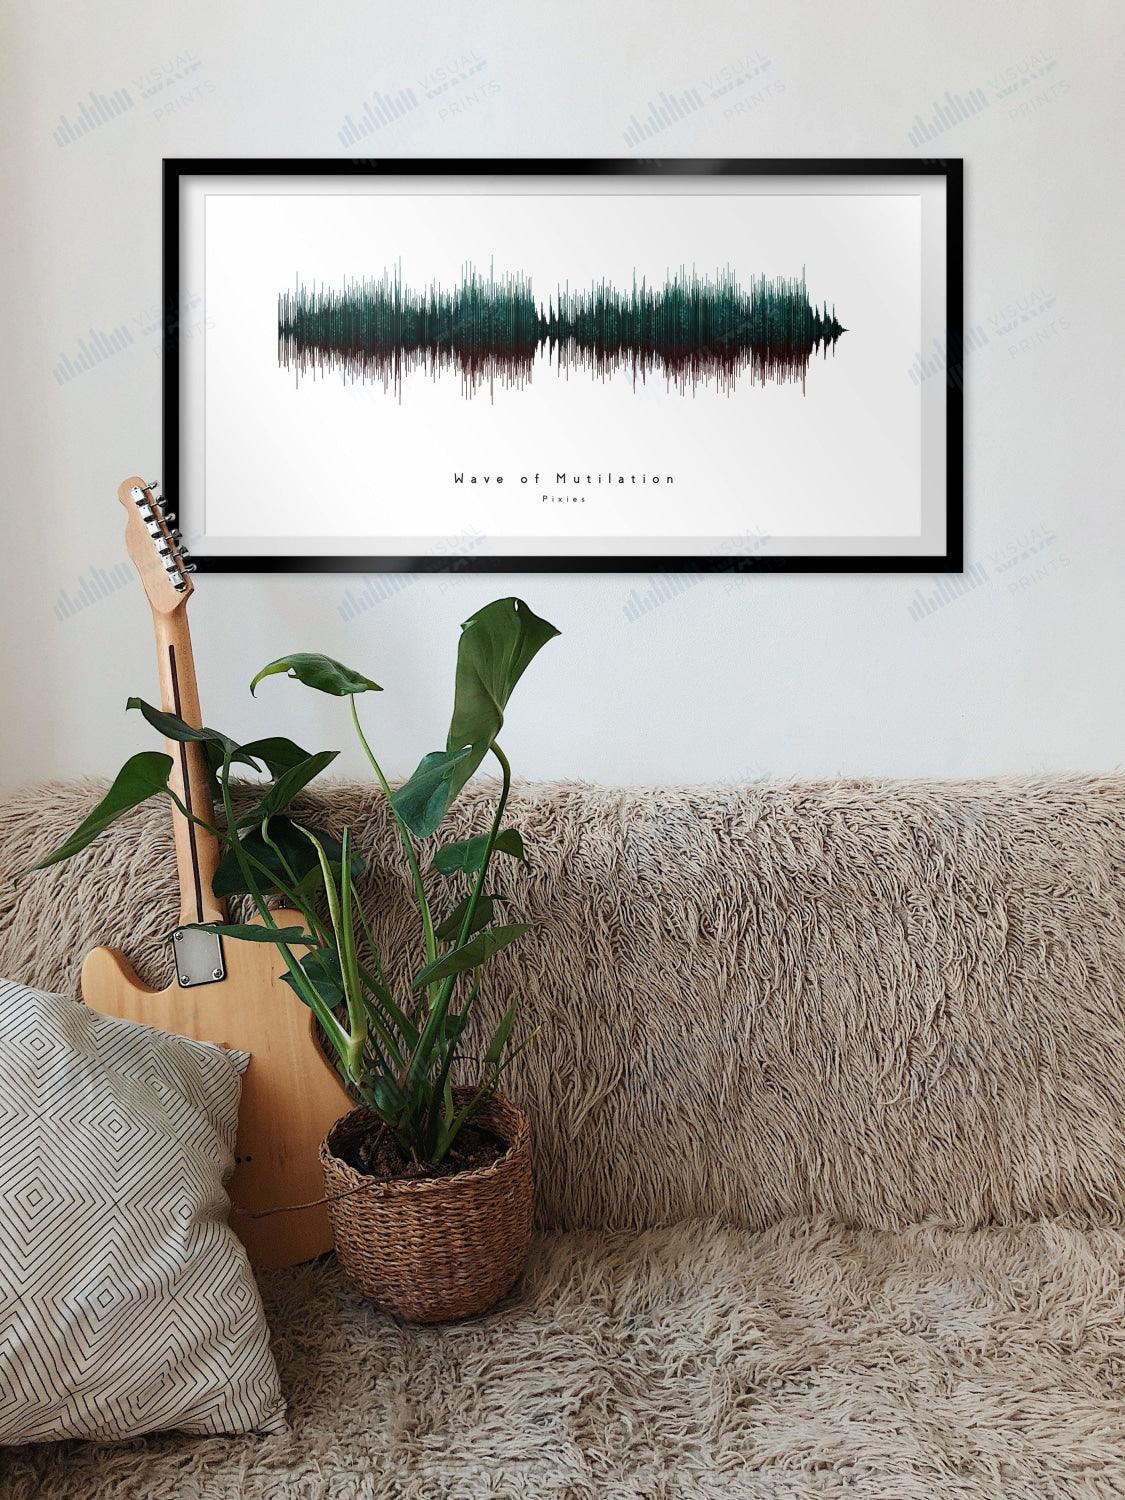 Wave of Mutilation by Pixies - Visual Wave Prints